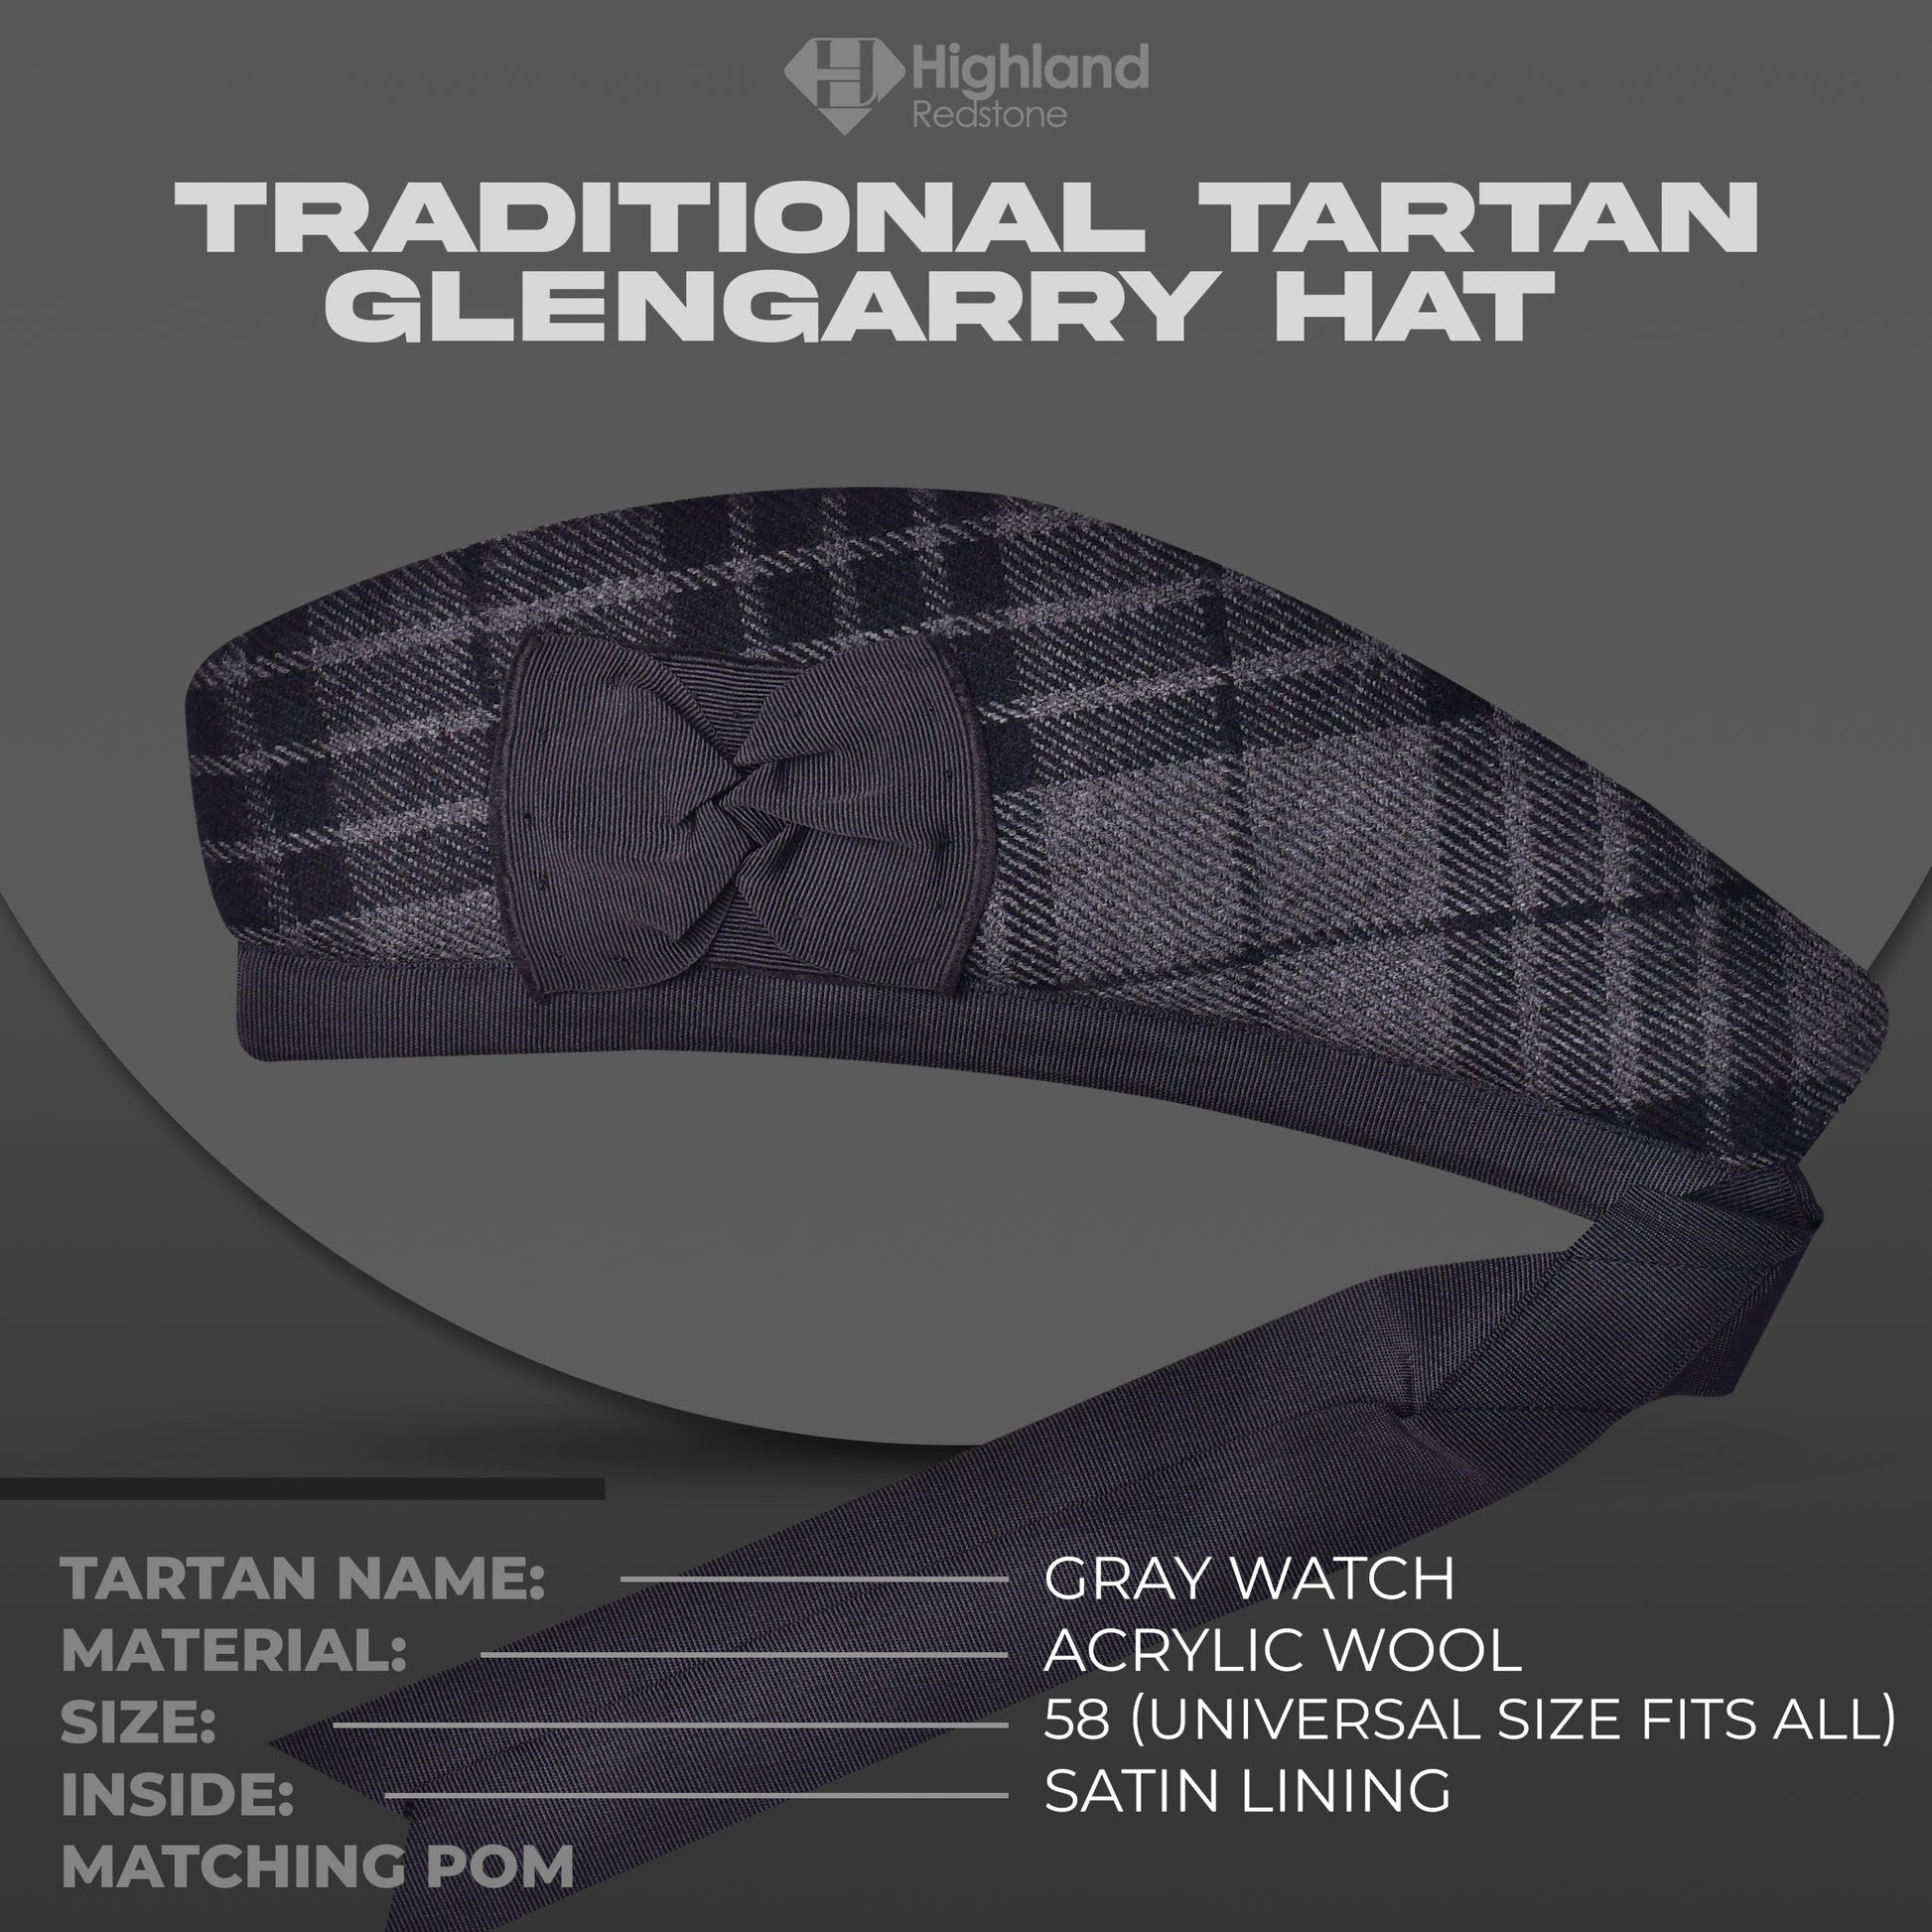 Gray Watch Glengarry featuring the gray and black tartan pattern of the Watch Clan, crafted from high-quality materials.